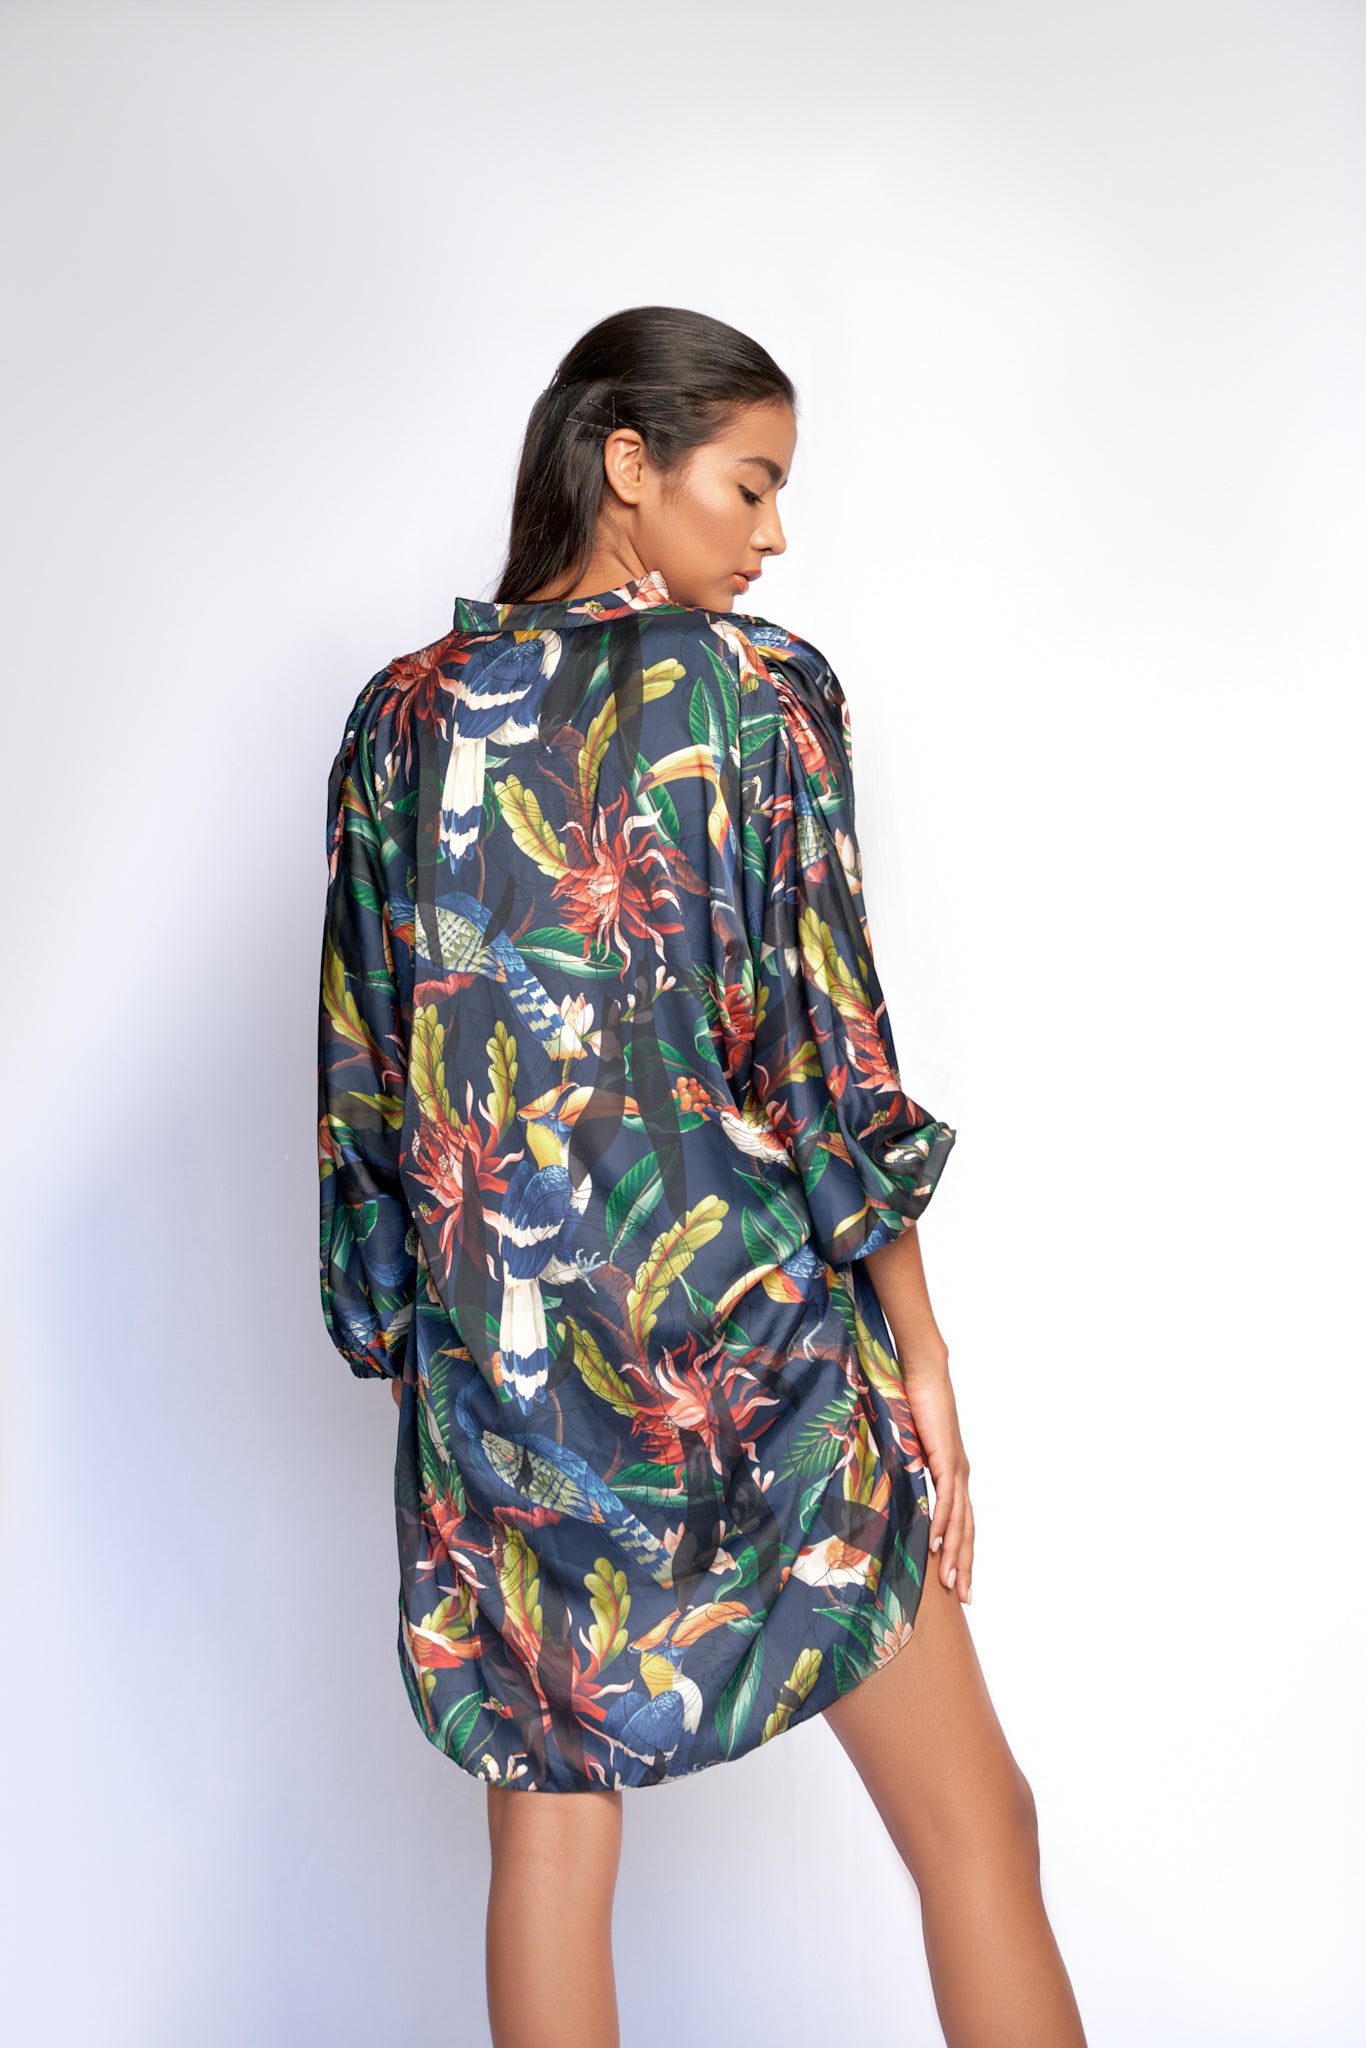 Tropical print blouse by Adriana Contreras